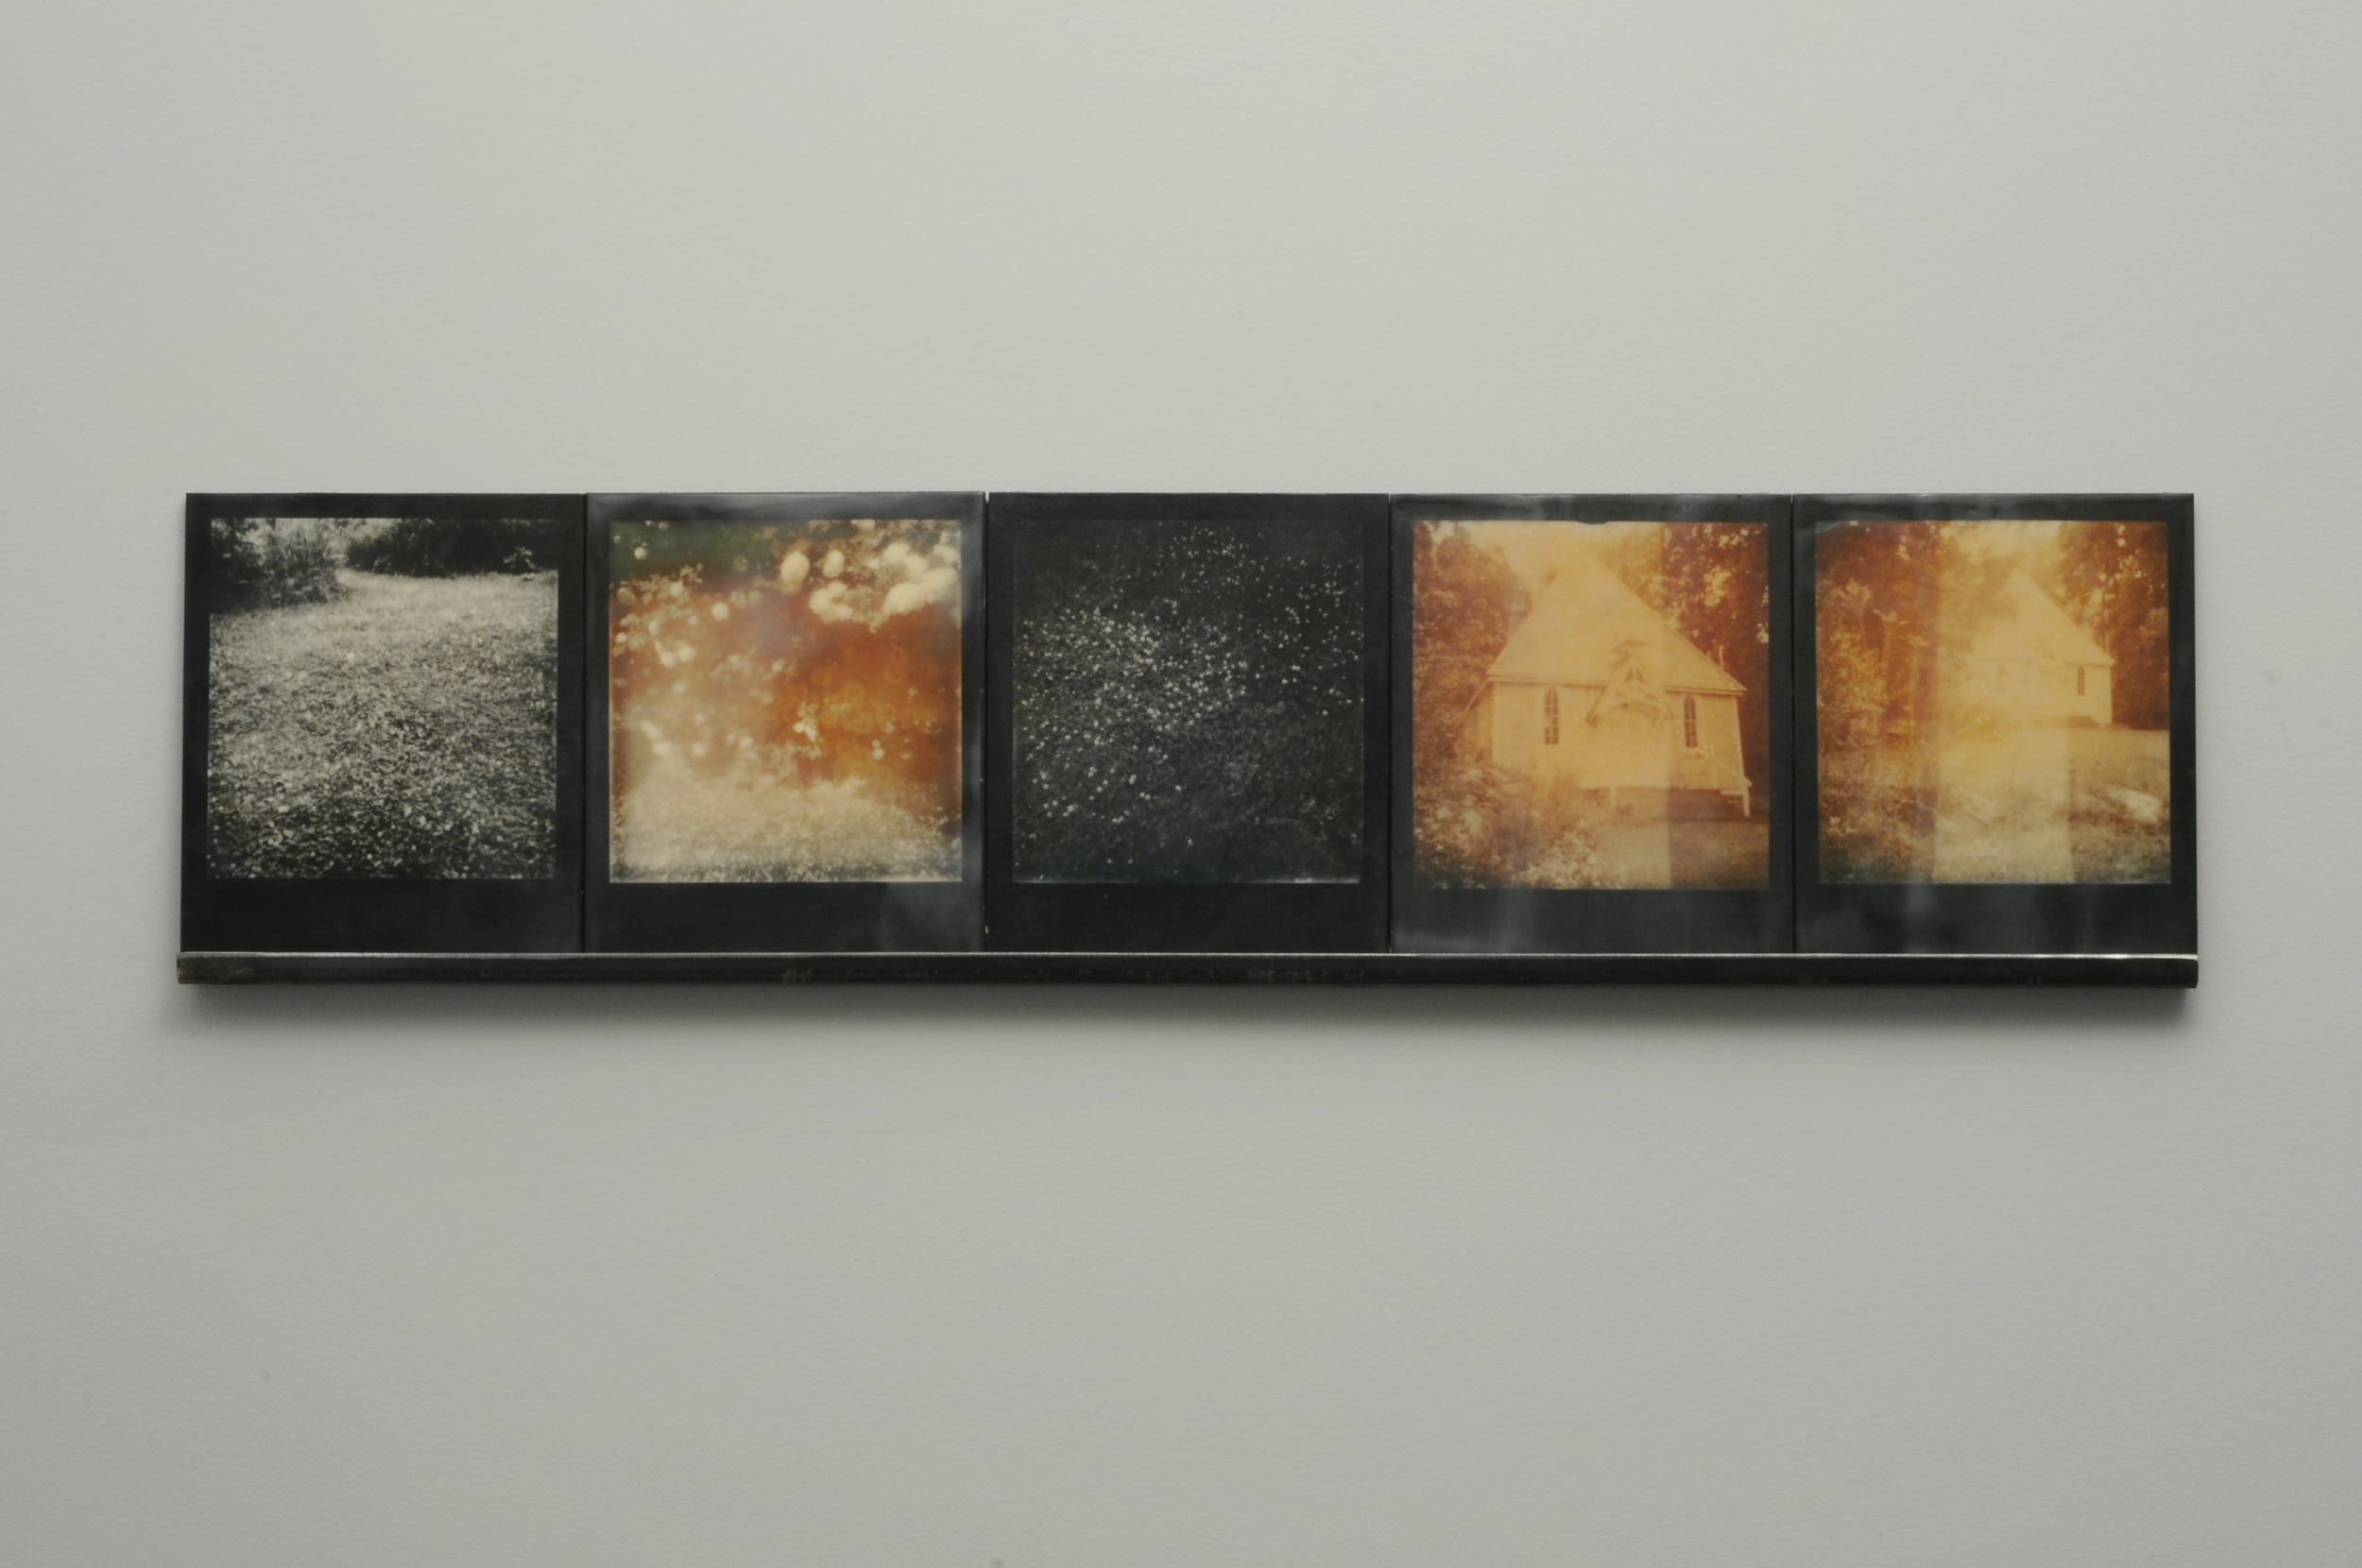    Clove  , 2015, pigment prints on cotton and panel with encaustic medium and steel shelf, 8.5" x 35.25"&nbsp;&nbsp;&nbsp;&nbsp; variable edition of 2 and 1 artist proof 